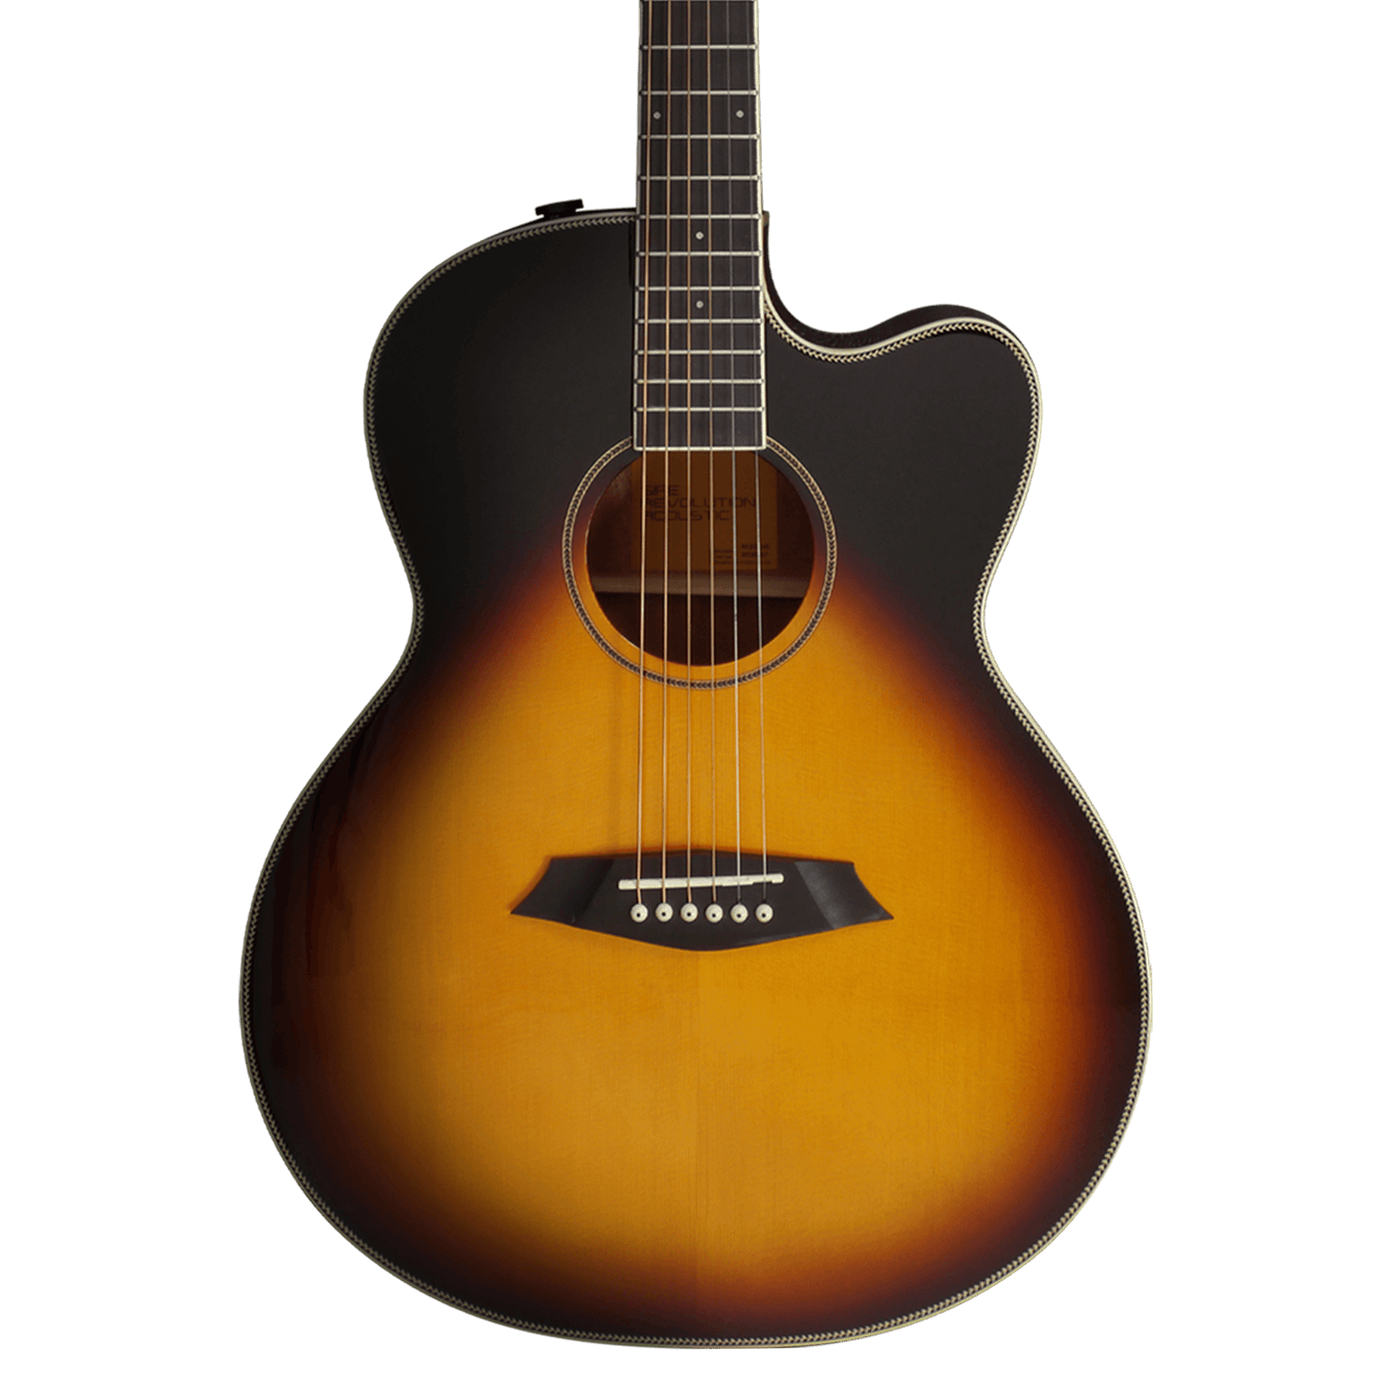 Sire A3-G Vintage Sunburst - $699990 - Gearhub - The Sire A3 is the pioneer solid top acoustic guitar in the Larry Carlton acoustic guitars line, which offers equilibrium between the cutting-edge design and excellent performance. The A3 has two body shapes, Dreadnought and Grand Auditorium. It's added with the custom shop feature rolled fretboard edges to provide a more comfortable, and natural grip. Cuerpo • Modelo: Larry Carlton A3-G (Grand Auditorium)• Top: Roasted Solid Spruce• Sides: Mahogany• Top: Sol